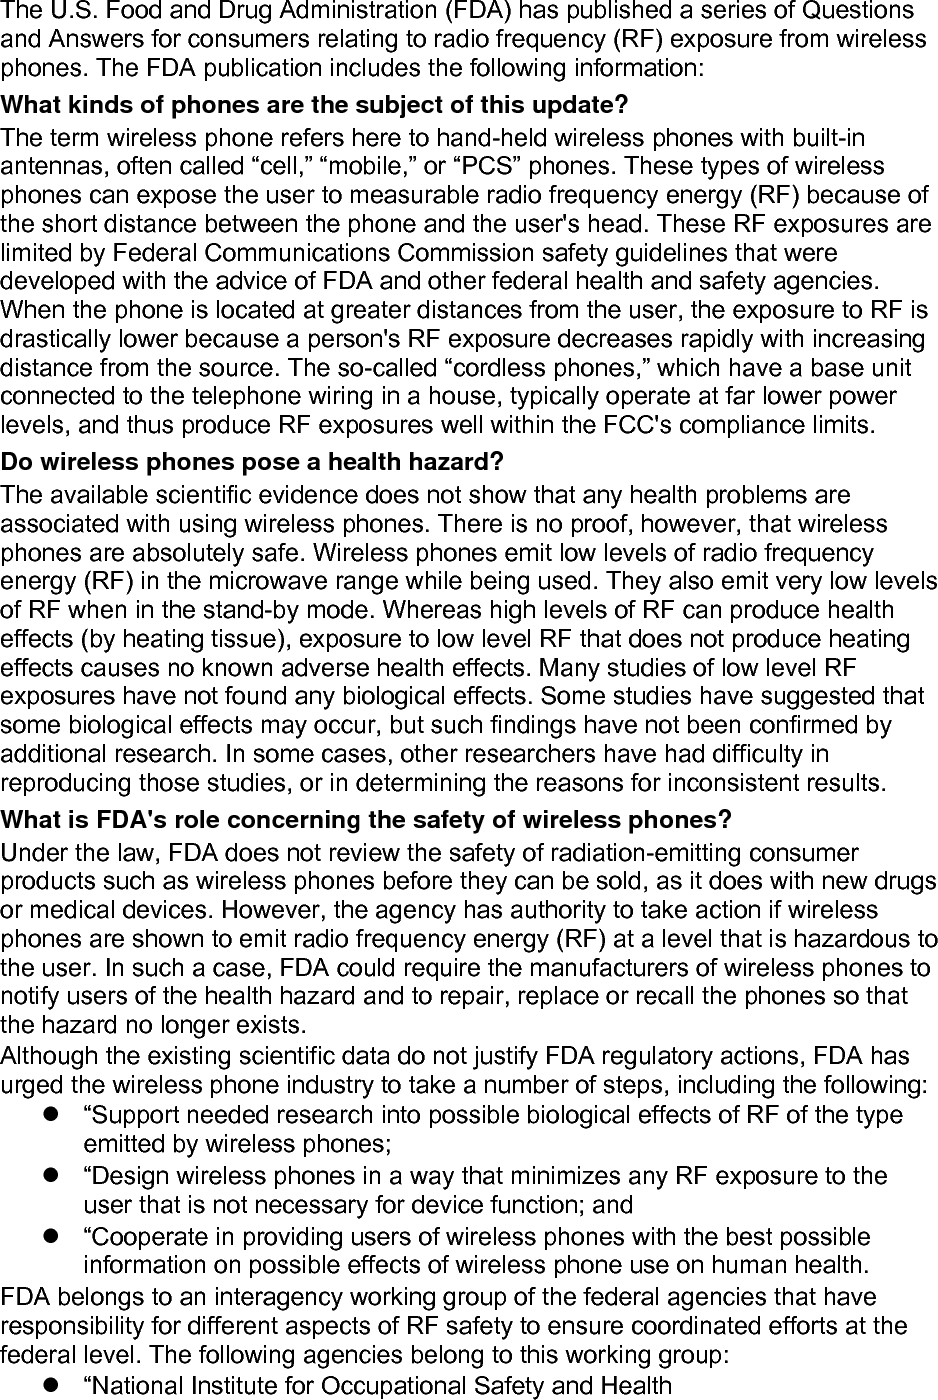 The U.S. Food and Drug Administration (FDA) has published a series of Questions and Answers for consumers relating to radio frequency (RF) exposure from wireless phones. The FDA publication includes the following information: What kinds of phones are the subject of this update? The term wireless phone refers here to hand-held wireless phones with built-in antennas, often called “cell,” “mobile,” or “PCS” phones. These types of wireless phones can expose the user to measurable radio frequency energy (RF) because of the short distance between the phone and the user&apos;s head. These RF exposures are limited by Federal Communications Commission safety guidelines that were developed with the advice of FDA and other federal health and safety agencies. When the phone is located at greater distances from the user, the exposure to RF is drastically lower because a person&apos;s RF exposure decreases rapidly with increasing distance from the source. The so-called “cordless phones,” which have a base unit connected to the telephone wiring in a house, typically operate at far lower power levels, and thus produce RF exposures well within the FCC&apos;s compliance limits. Do wireless phones pose a health hazard? The available scientific evidence does not show that any health problems are associated with using wireless phones. There is no proof, however, that wireless phones are absolutely safe. Wireless phones emit low levels of radio frequency energy (RF) in the microwave range while being used. They also emit very low levels of RF when in the stand-by mode. Whereas high levels of RF can produce health effects (by heating tissue), exposure to low level RF that does not produce heating effects causes no known adverse health effects. Many studies of low level RF exposures have not found any biological effects. Some studies have suggested that some biological effects may occur, but such findings have not been confirmed by additional research. In some cases, other researchers have had difficulty in reproducing those studies, or in determining the reasons for inconsistent results. What is FDA&apos;s role concerning the safety of wireless phones? Under the law, FDA does not review the safety of radiation-emitting consumer products such as wireless phones before they can be sold, as it does with new drugs or medical devices. However, the agency has authority to take action if wireless phones are shown to emit radio frequency energy (RF) at a level that is hazardous to the user. In such a case, FDA could require the manufacturers of wireless phones to notify users of the health hazard and to repair, replace or recall the phones so that the hazard no longer exists. Although the existing scientific data do not justify FDA regulatory actions, FDA has urged the wireless phone industry to take a number of steps, including the following:   “Support needed research into possible biological effects of RF of the type emitted by wireless phones;   “Design wireless phones in a way that minimizes any RF exposure to the user that is not necessary for device function; and   “Cooperate in providing users of wireless phones with the best possible information on possible effects of wireless phone use on human health. FDA belongs to an interagency working group of the federal agencies that have responsibility for different aspects of RF safety to ensure coordinated efforts at the federal level. The following agencies belong to this working group:   “National Institute for Occupational Safety and Health 